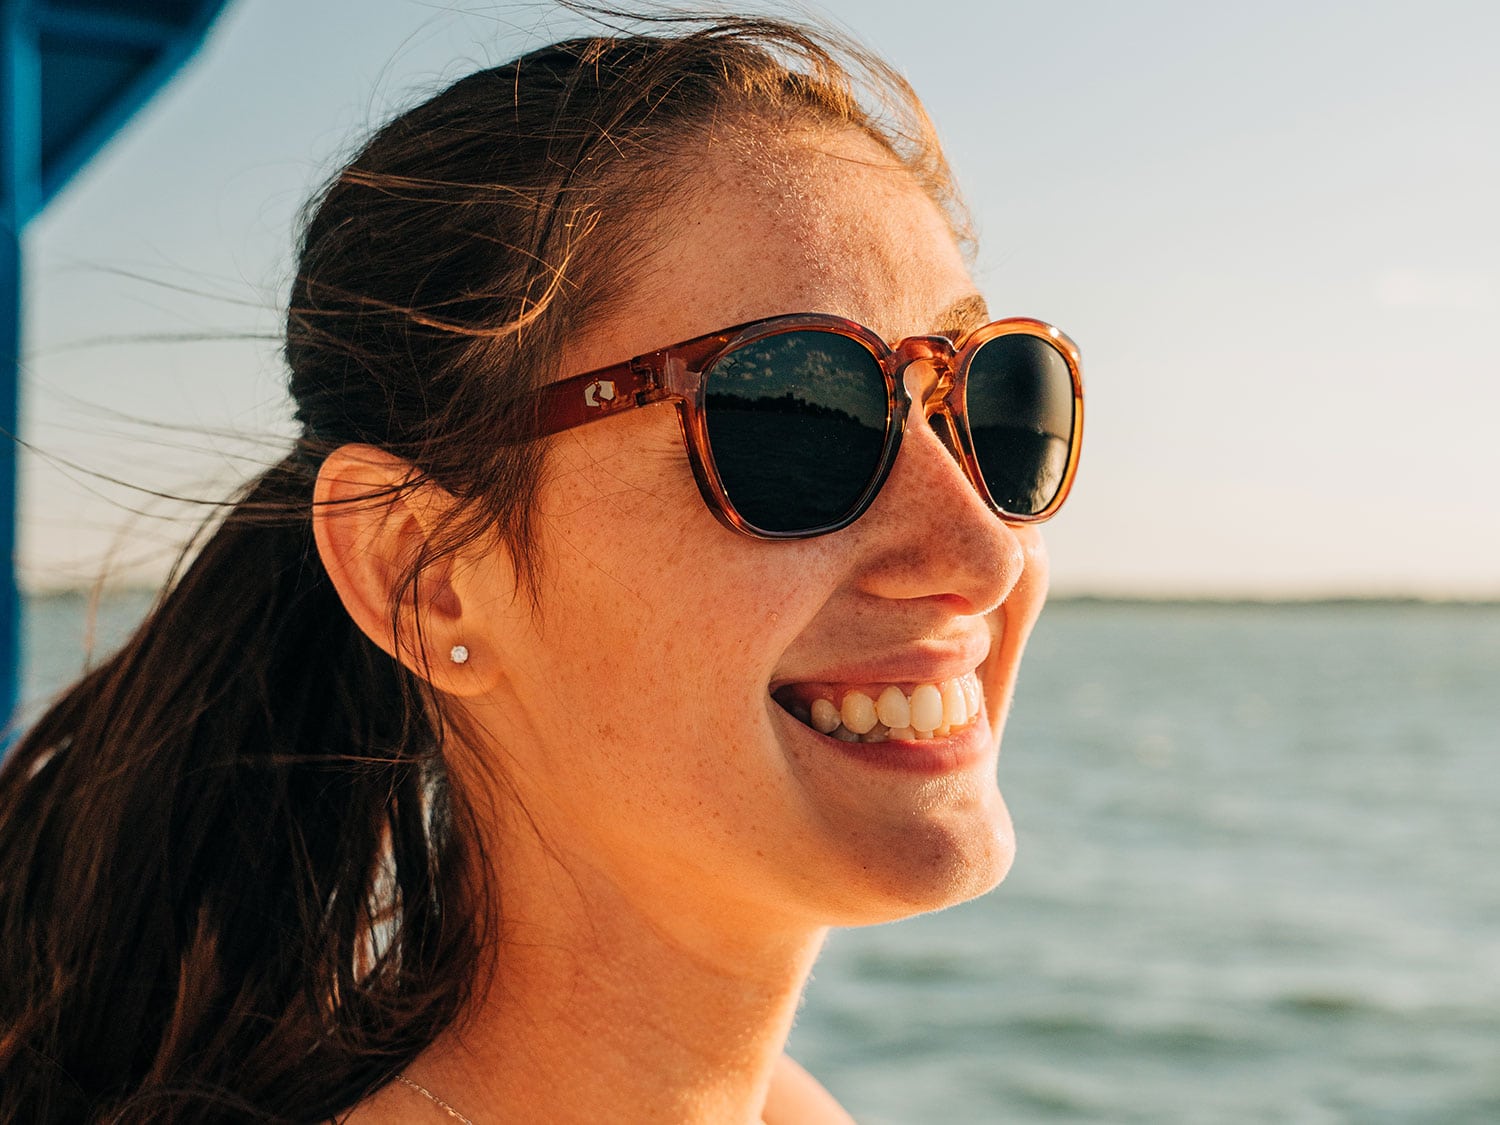 A woman smiling and wearing sunglasses.